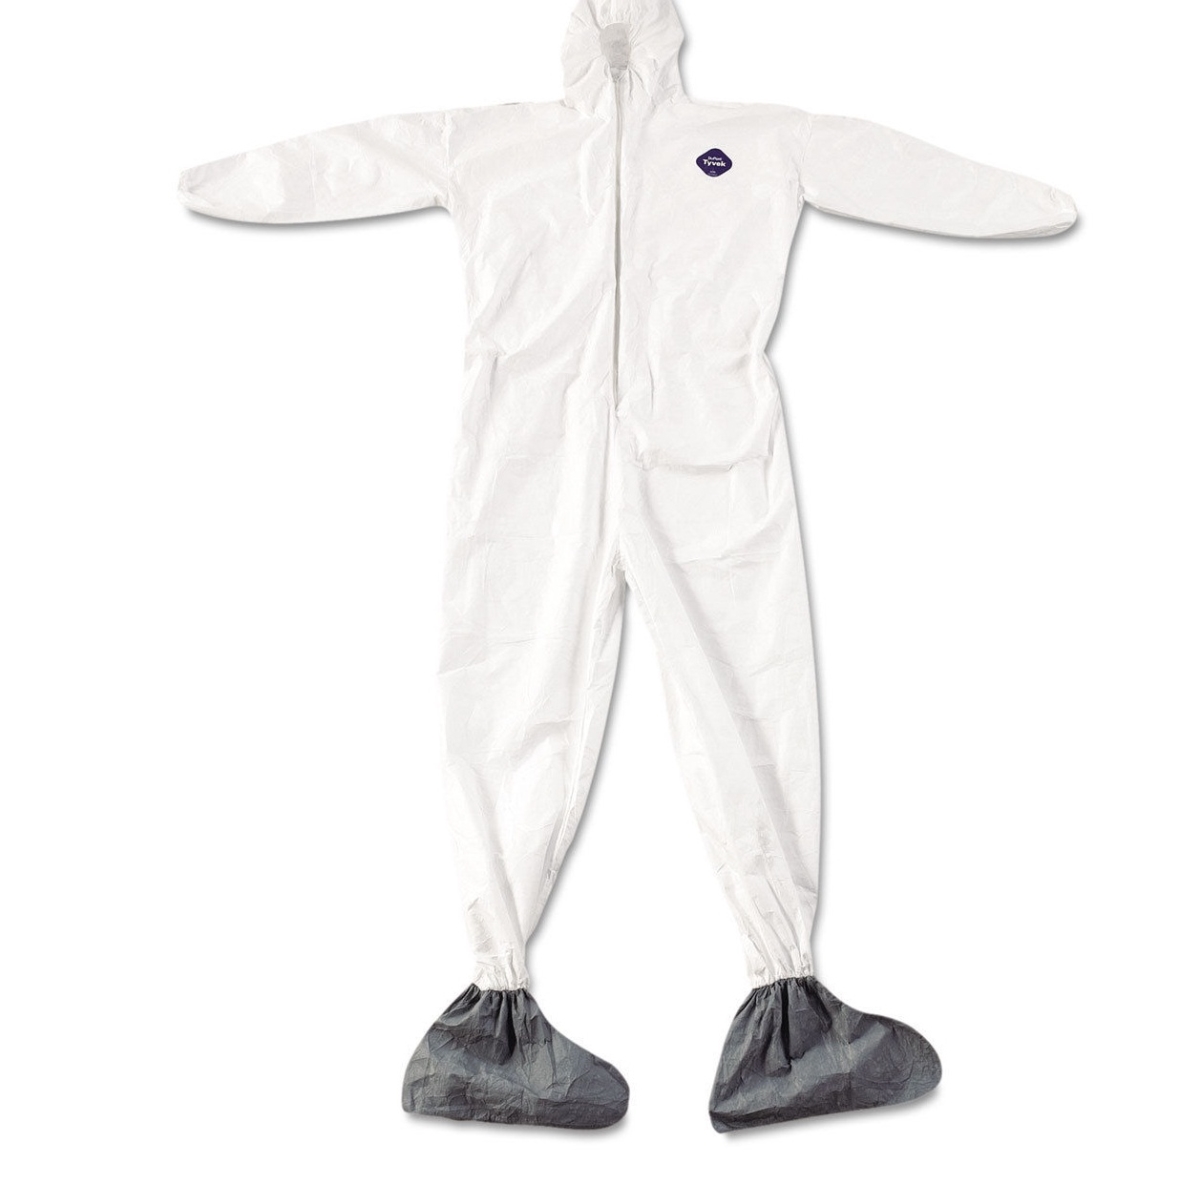 Picture of E.i. Dupont De Nemours 251-TY122S-XL Tyvek Elastic Cuff Hooded Coveralls with Boots, White & Extra Large, 25 per Case